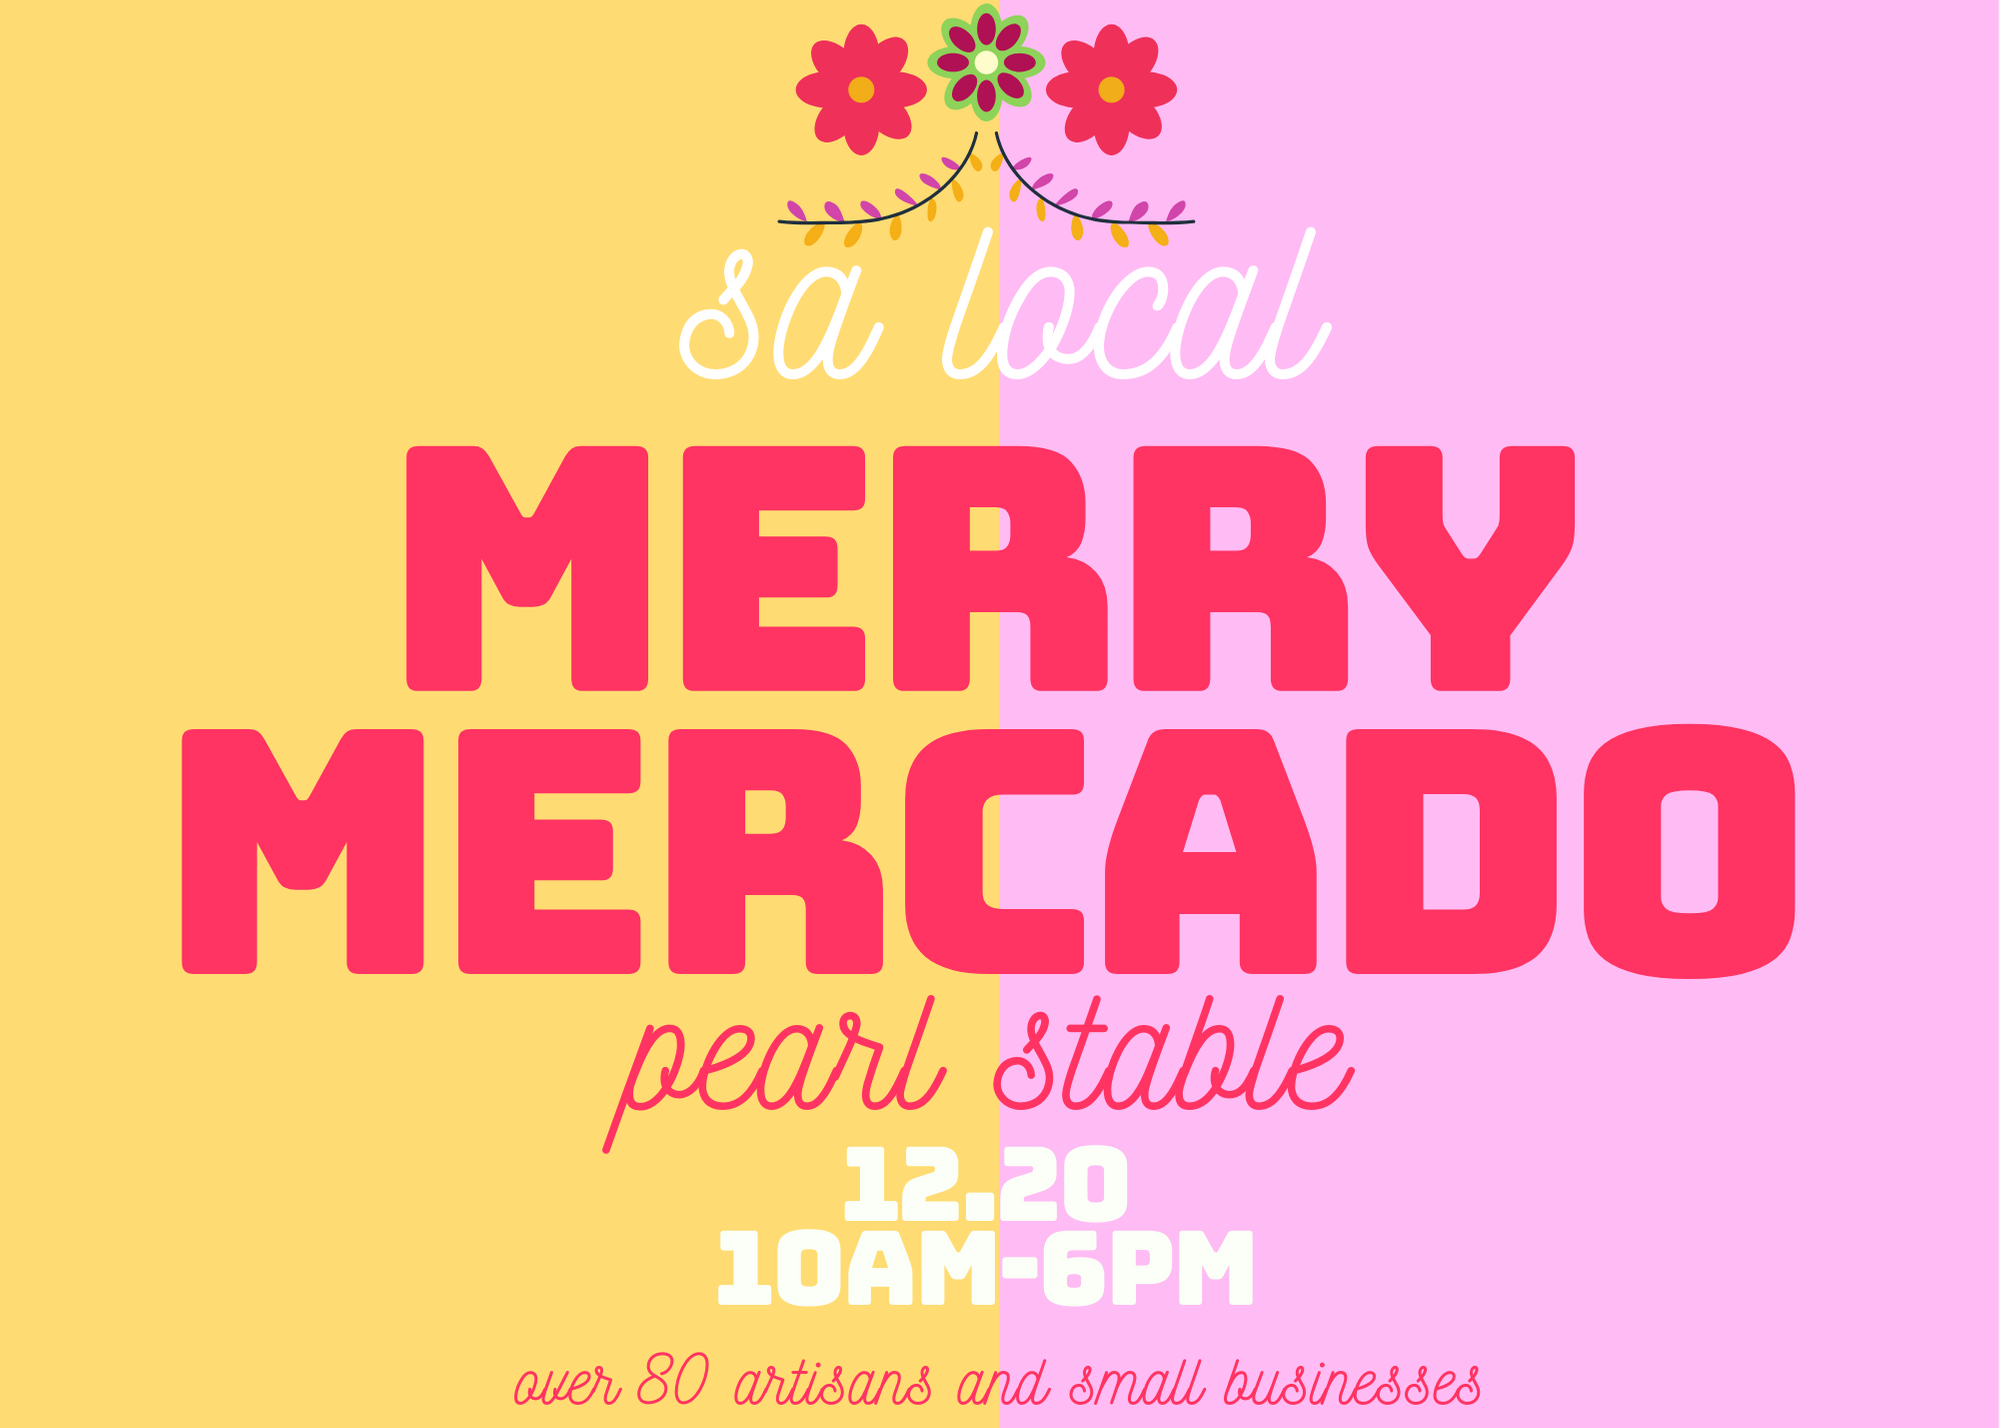 Merry Mercado at the Pearl Stable